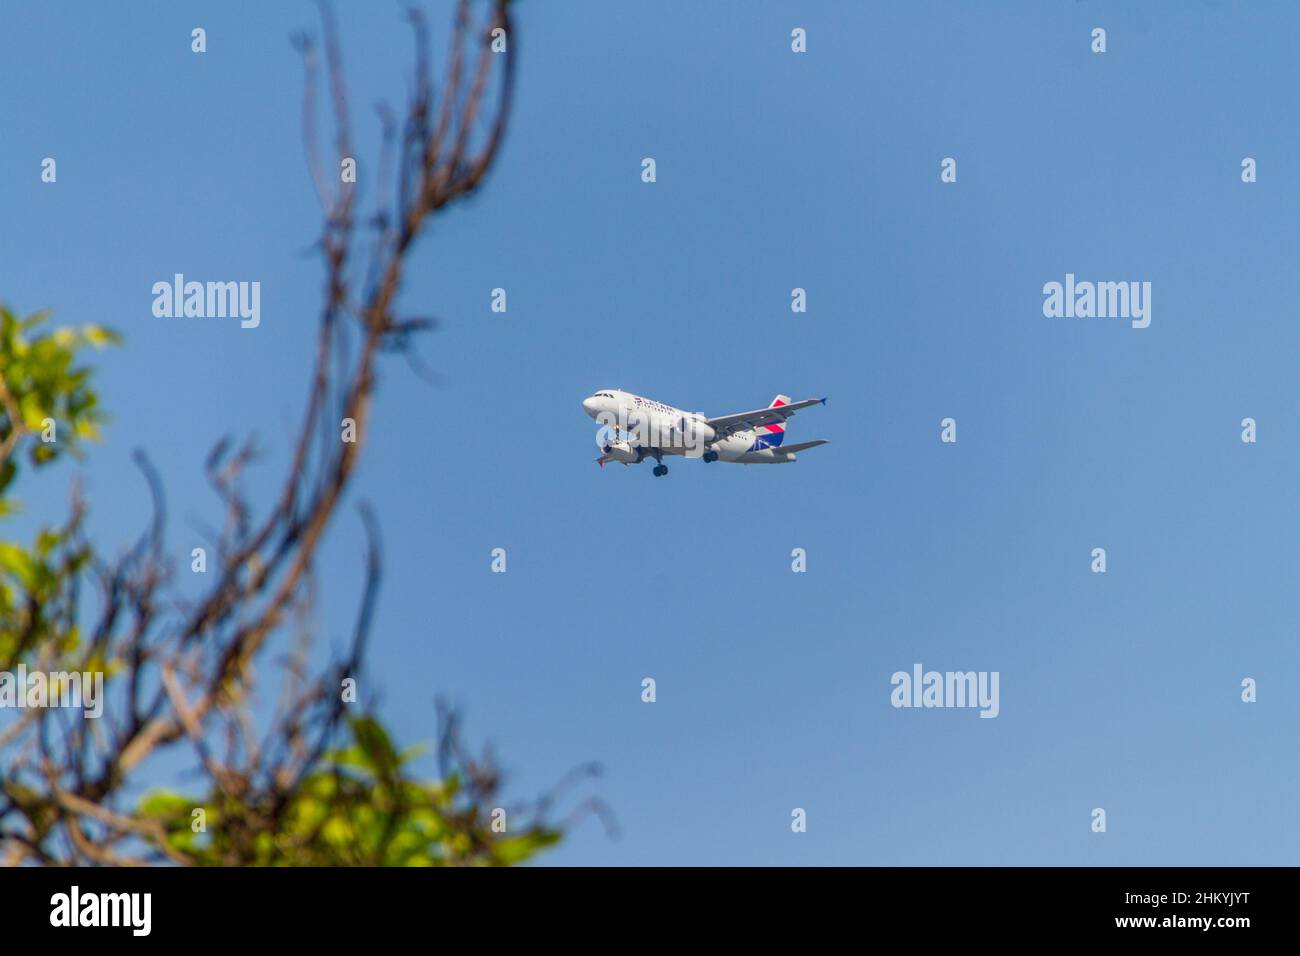 Airplane of LATAM Airlines company in Rio de Janeiro, Brazil - January 20, 2022: Airplane of Brazilian airline Latam, Flying with a beautiful blue sky Stock Photo